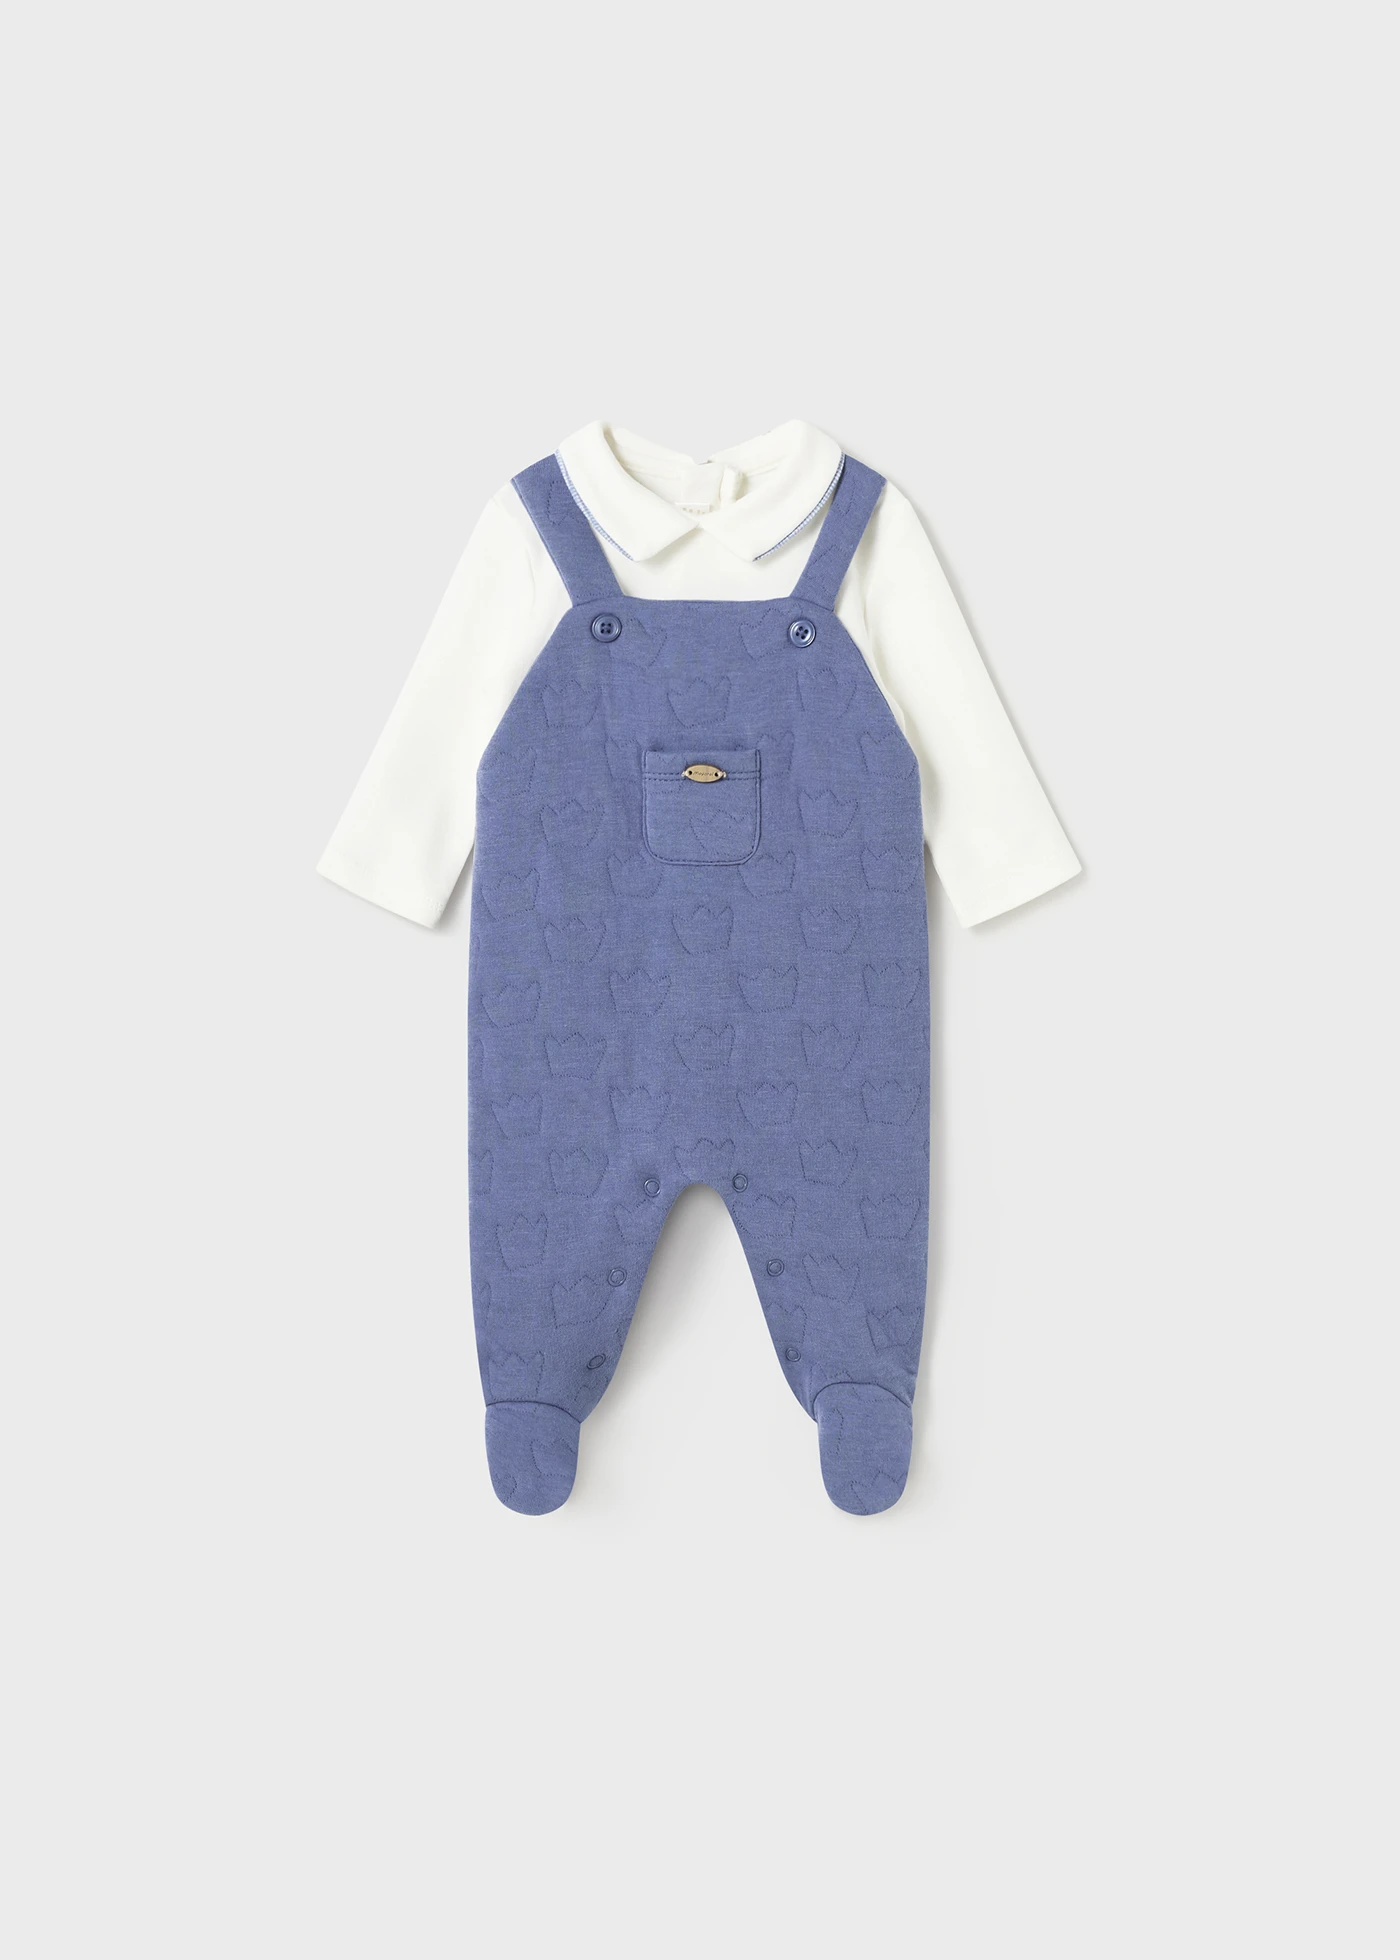 Mayoral Quilted Onesie Style 2670 - Winterblue